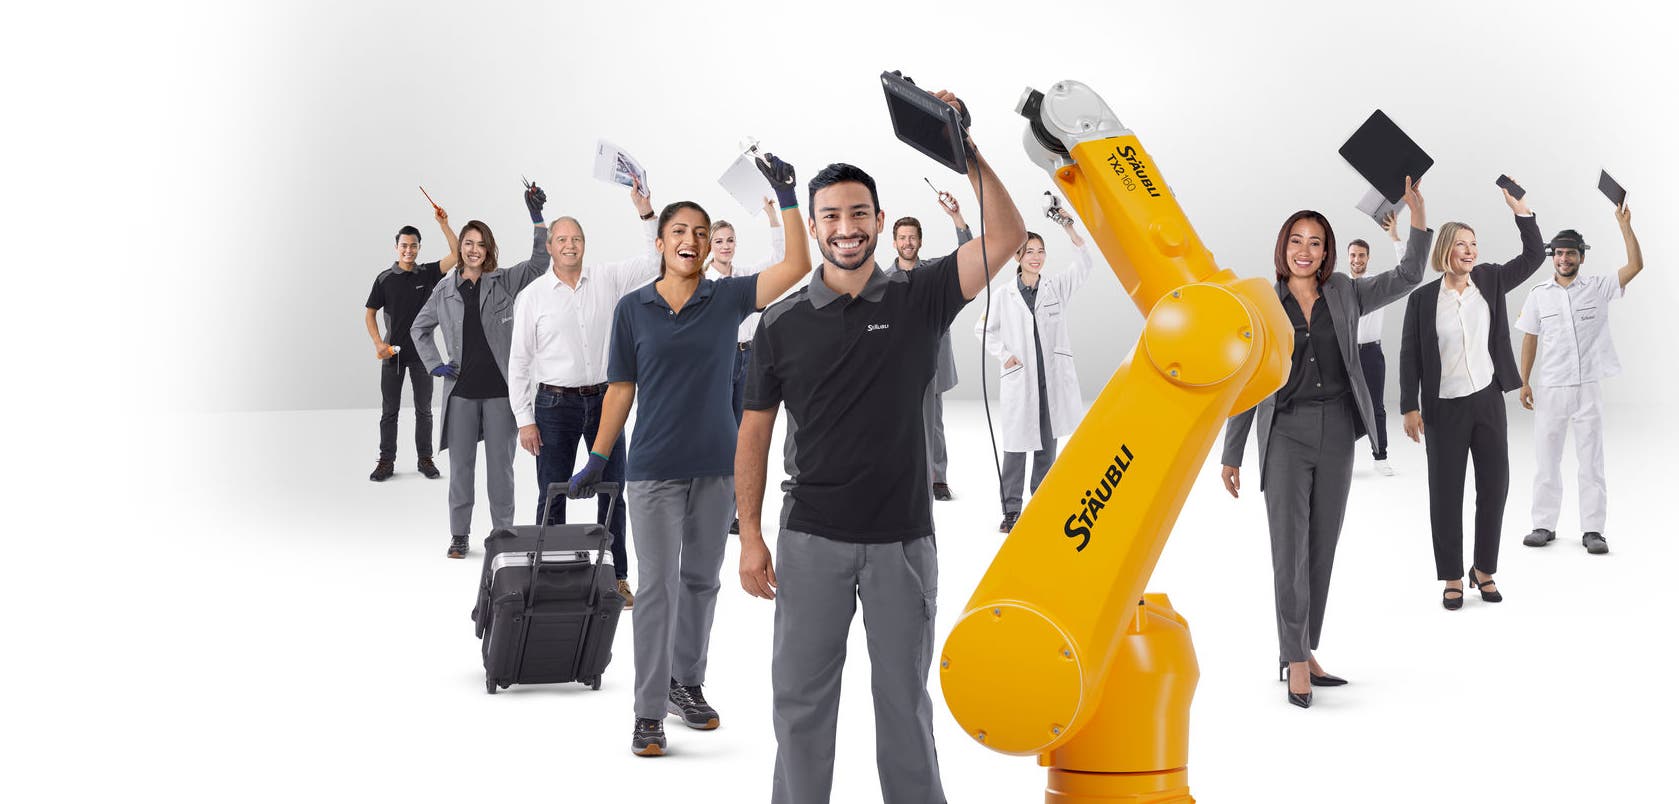 Beyond robots, a complete team including maintenance technicians, hotline, certified instructors, application and programming experts.